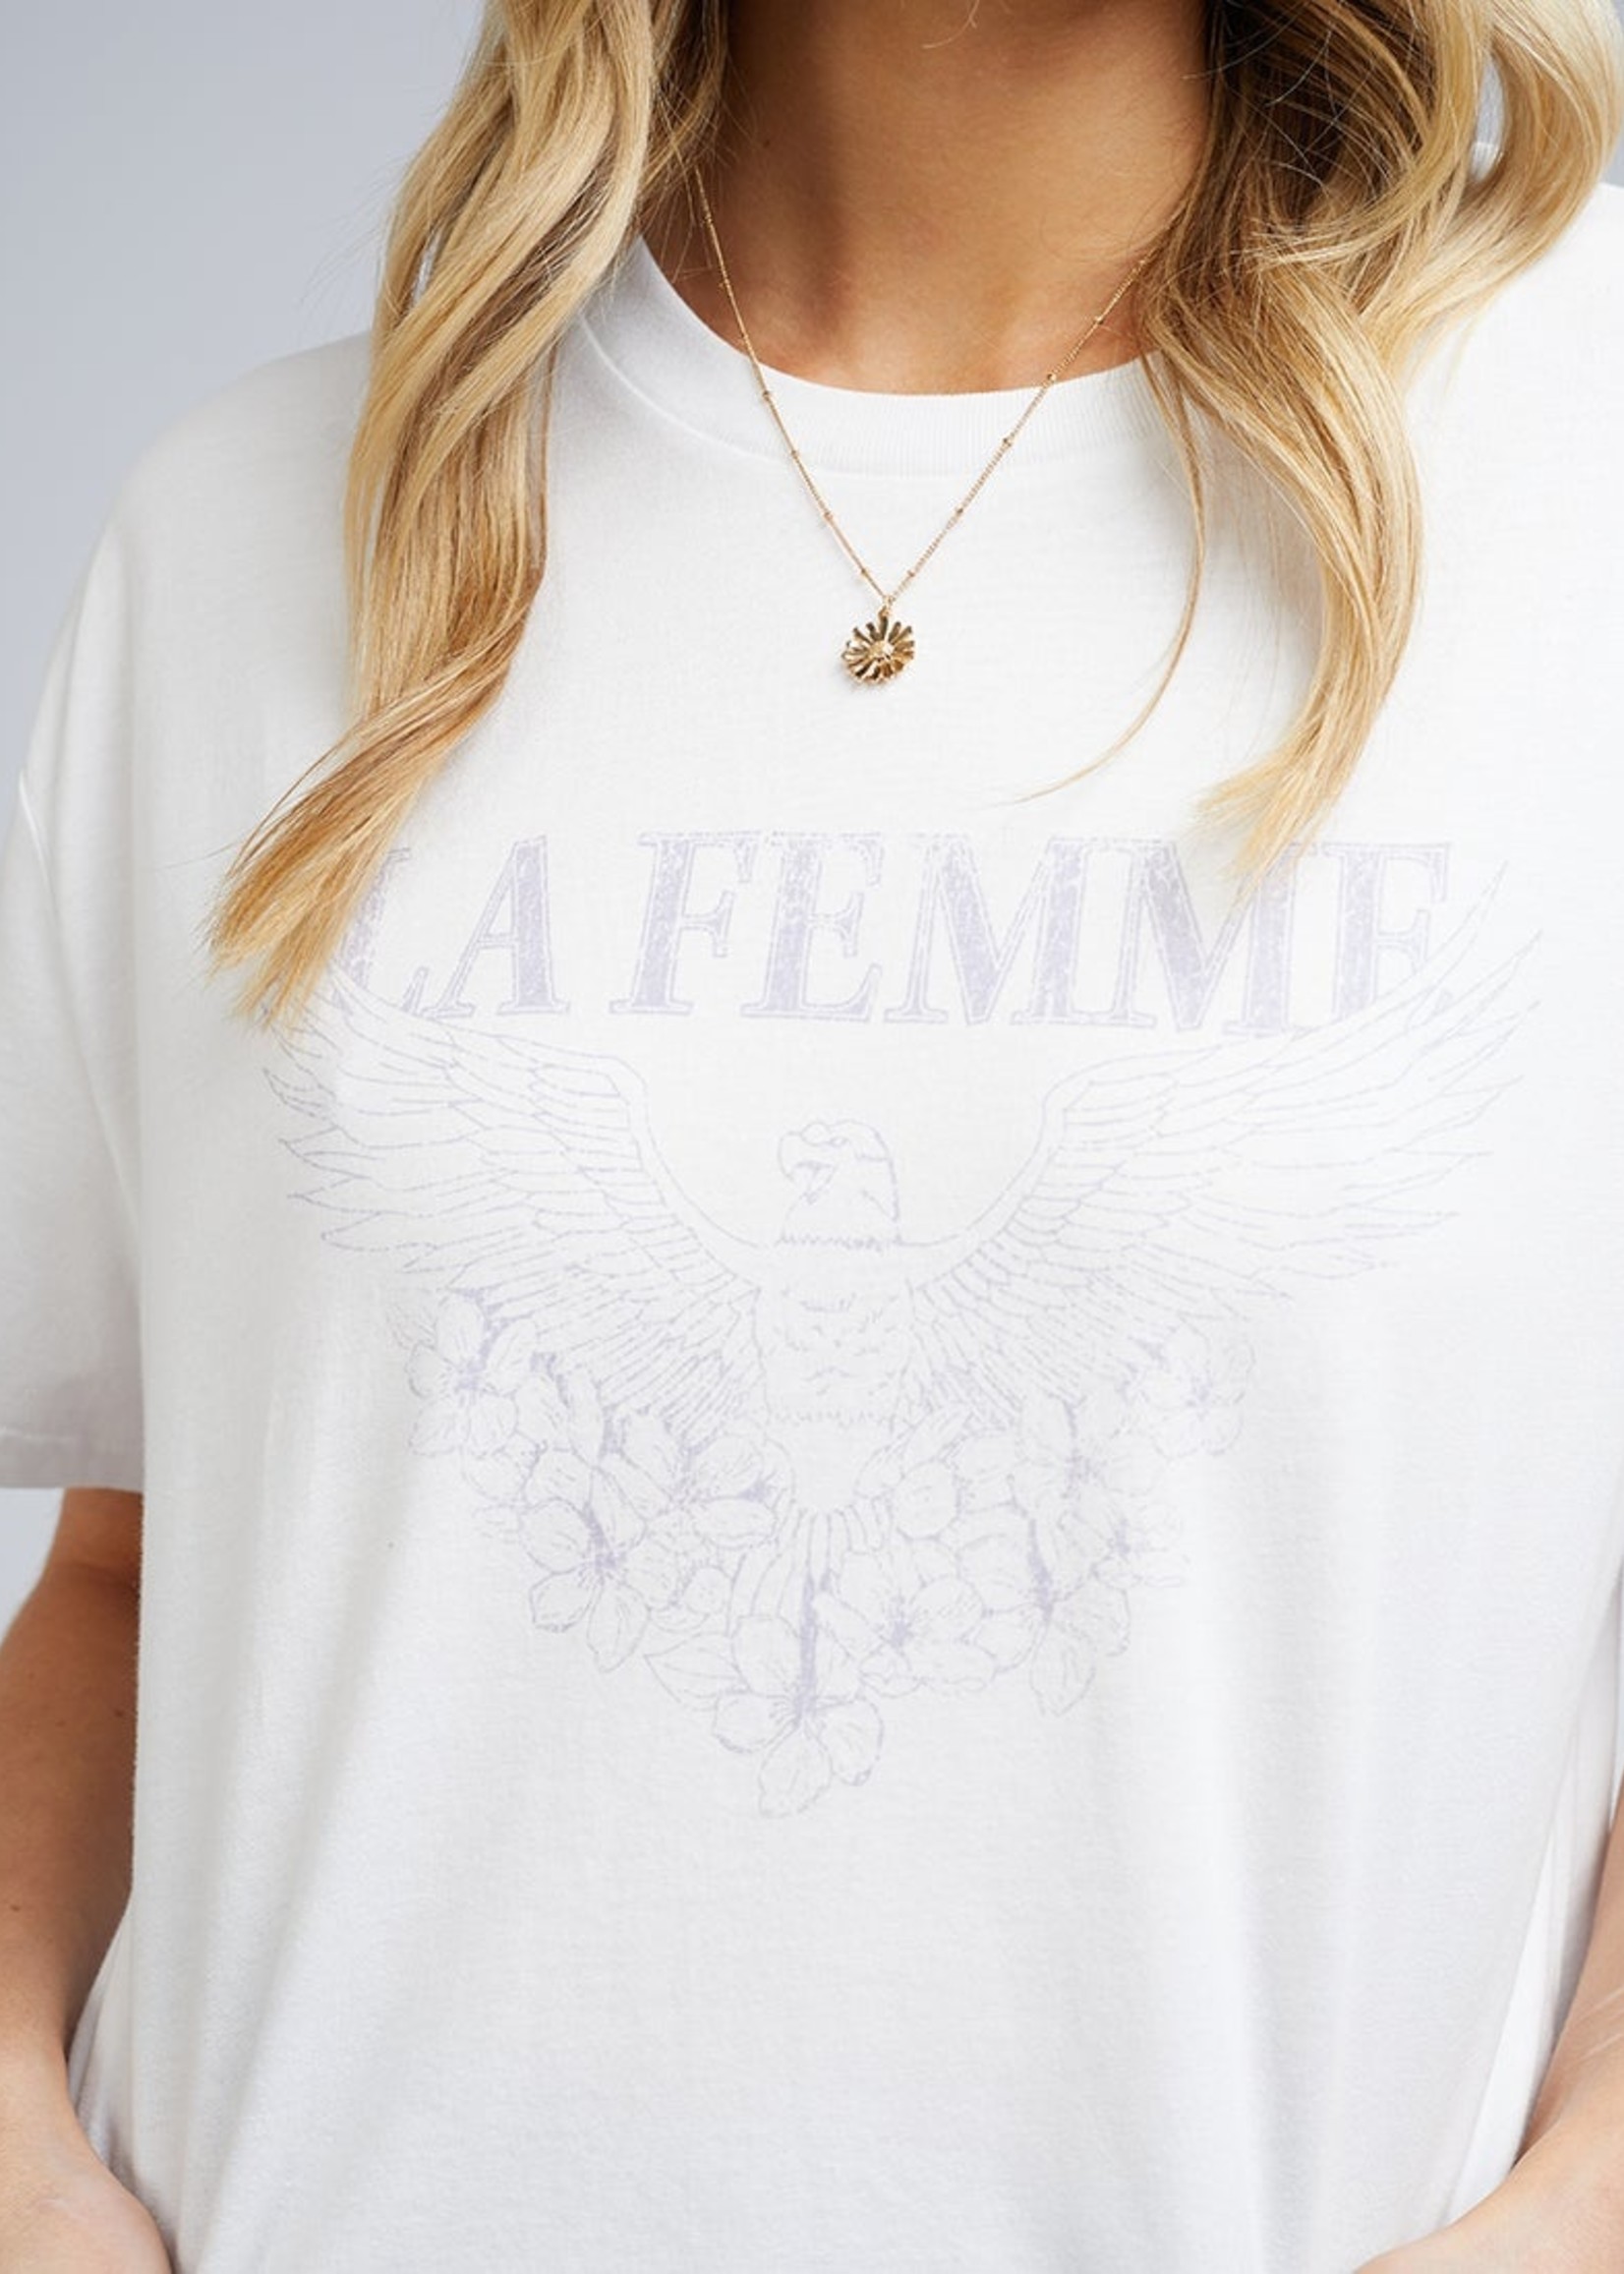 All About Eve La Femme Tee